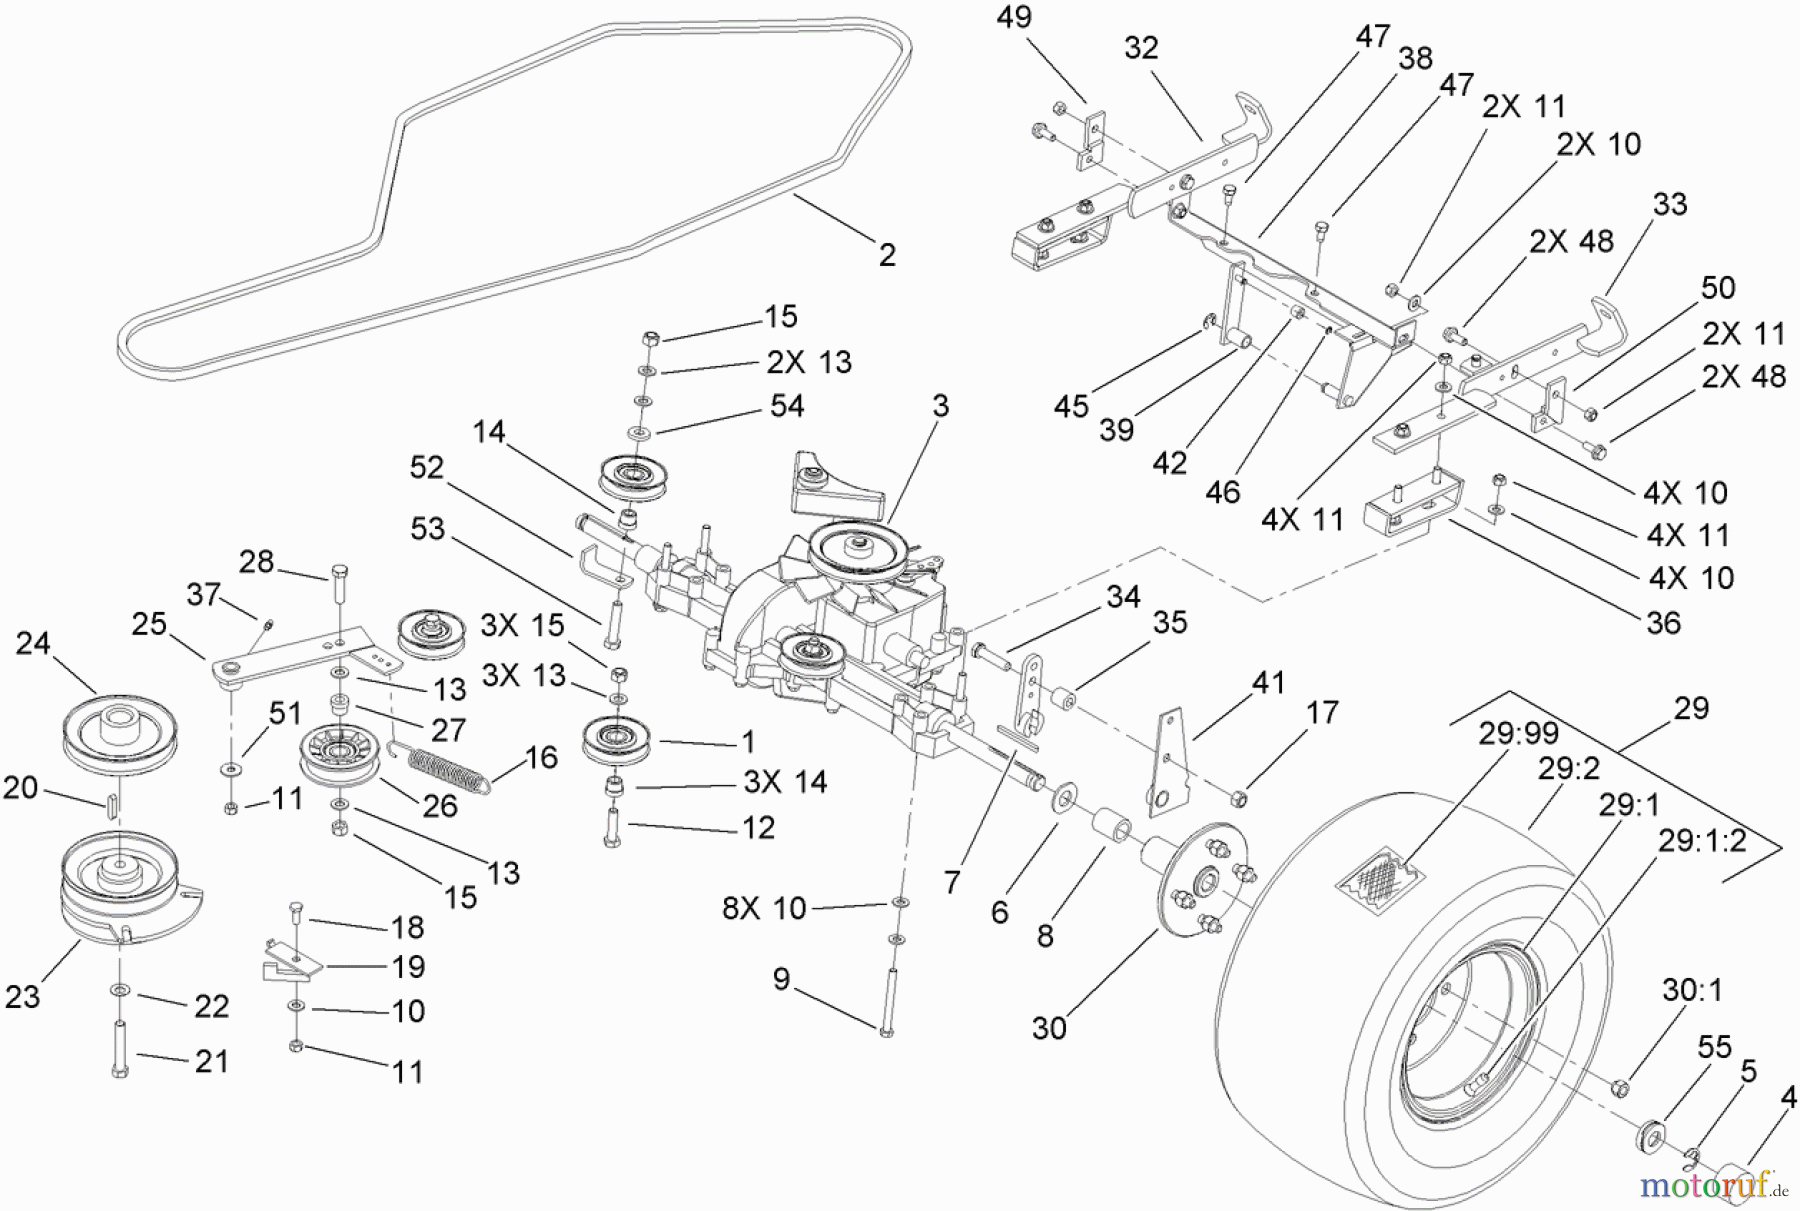  Toro Neu Mowers, Lawn & Garden Tractor Seite 1 74573 (DH 200) - Toro DH 200 Lawn Tractor, 2009 (290000481-290999999) TRANSMISSION DRIVE ASSEMBLY